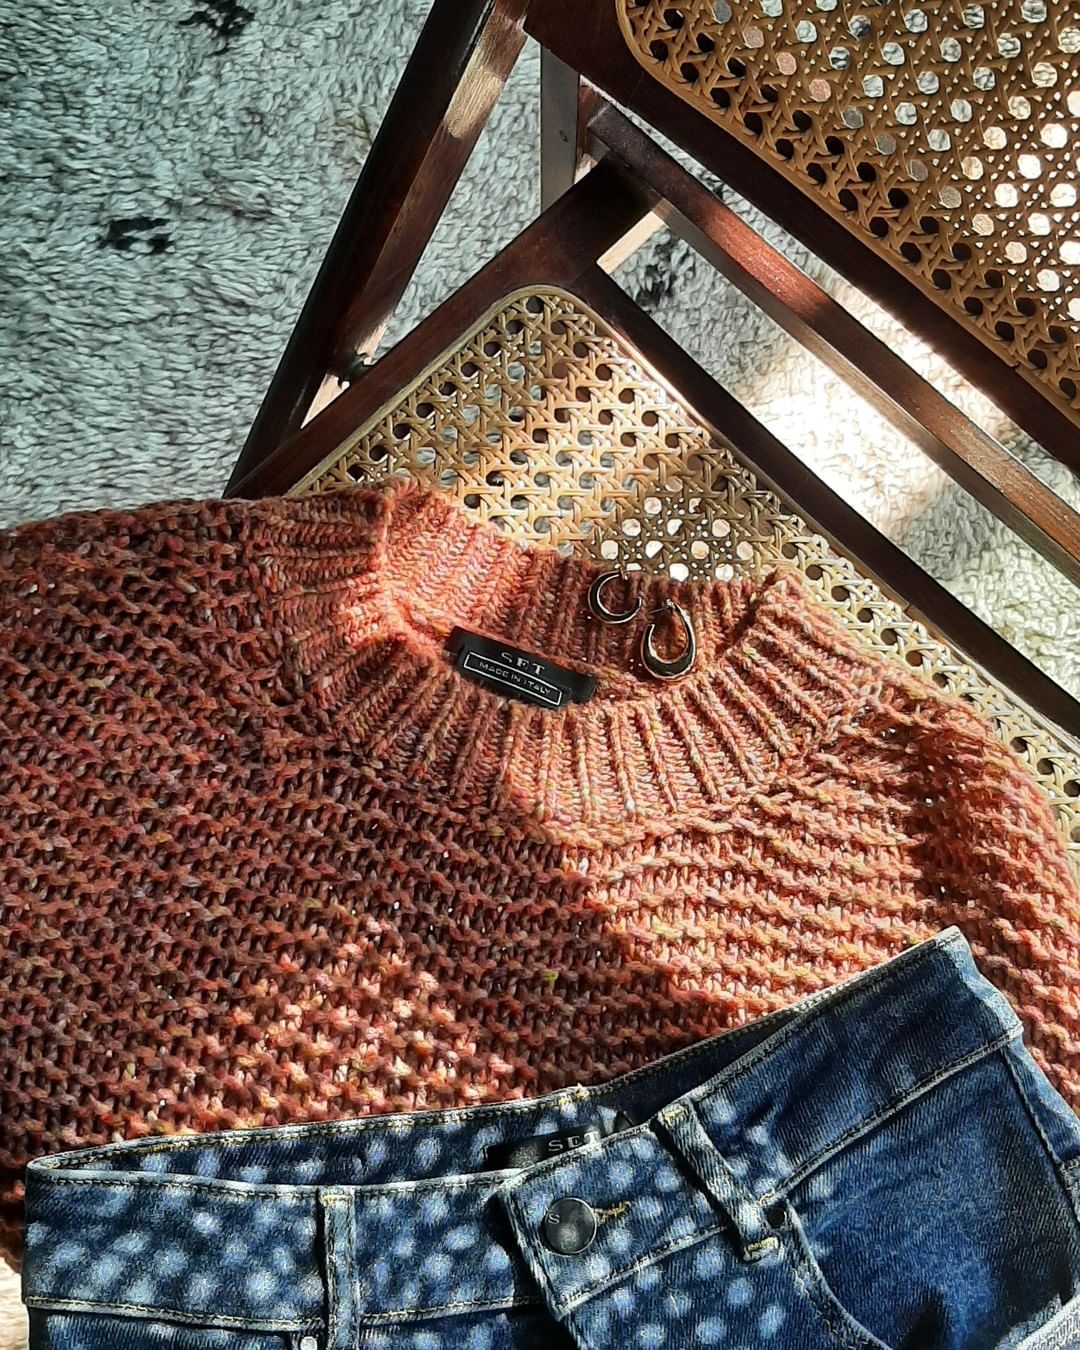 SET by Maya Junger - Changing colours - Our highlight knit is super soft and cozy and made in Italy! 

#SETfashion #portobelloroad #knit #sweaterweather